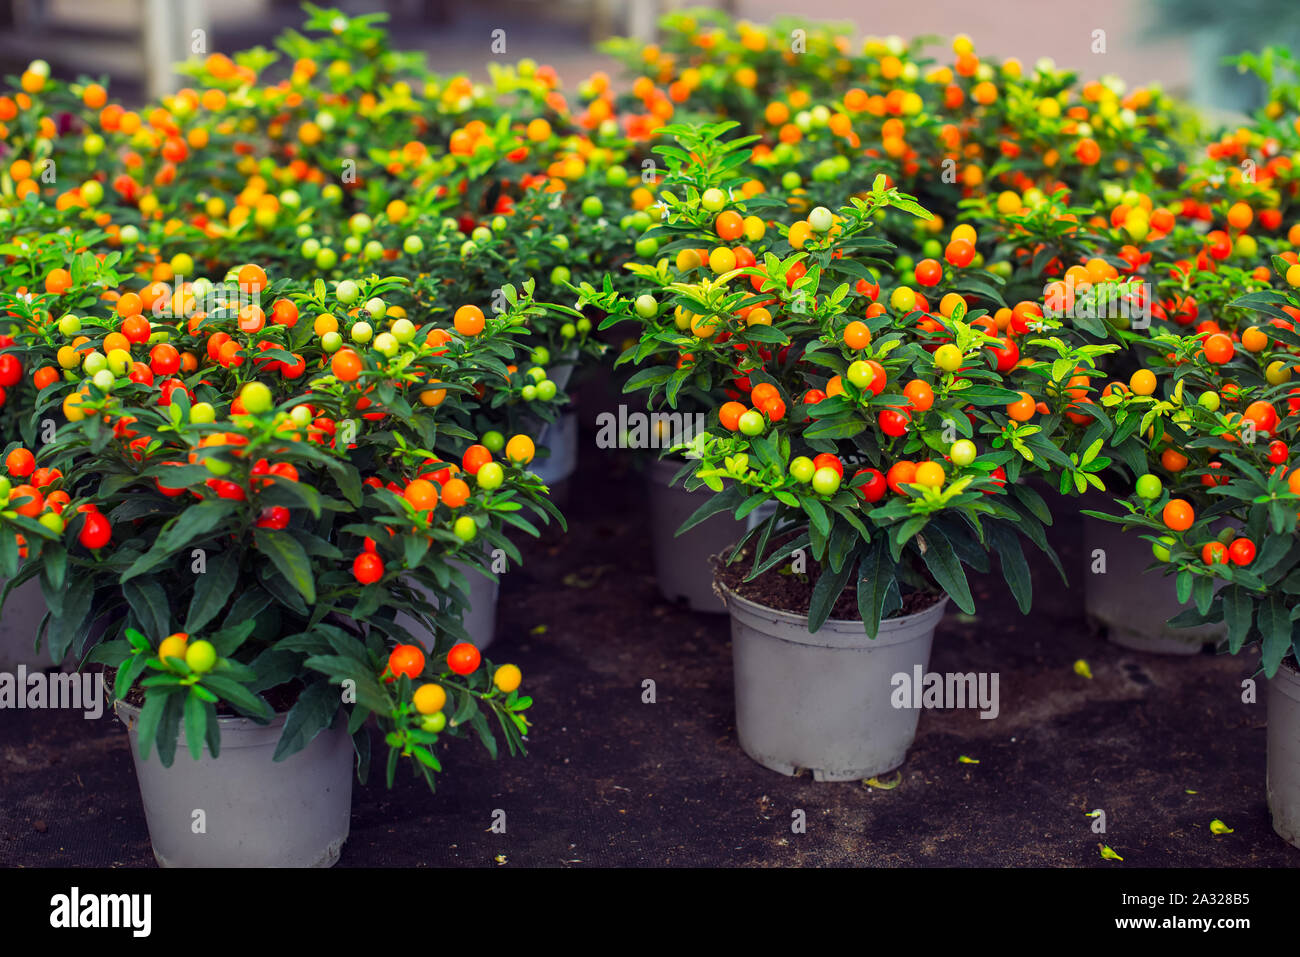 Potted Winter Cherry Plants Or Jerusalem Cherry Solanum Pseudocapsicum Ornamental Plant For Christmas At A Garden Centre Nightshade With Red And Gre Stock Photo Alamy